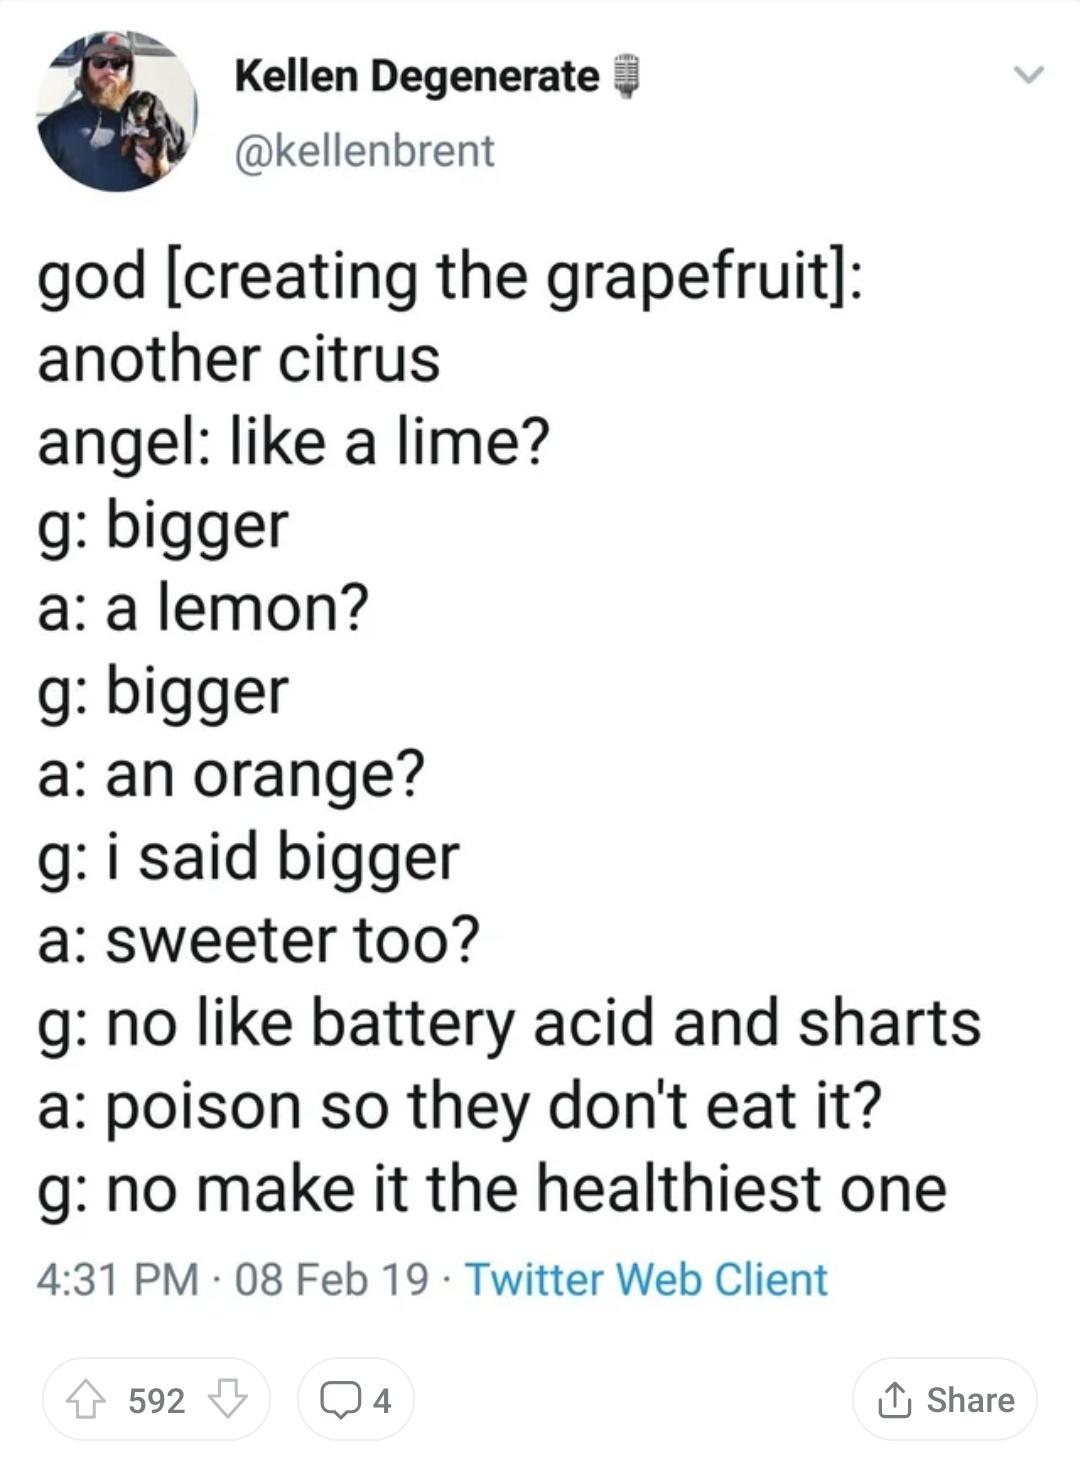 document - Kellen Degenerate god creating the grapefruit another citrus angel a lime? g bigger a a lemon? g bigger a an orange? g i said bigger a sweeter too? g no battery acid and sharts a poison so they don't eat it? g no make it the healthiest one 08 F